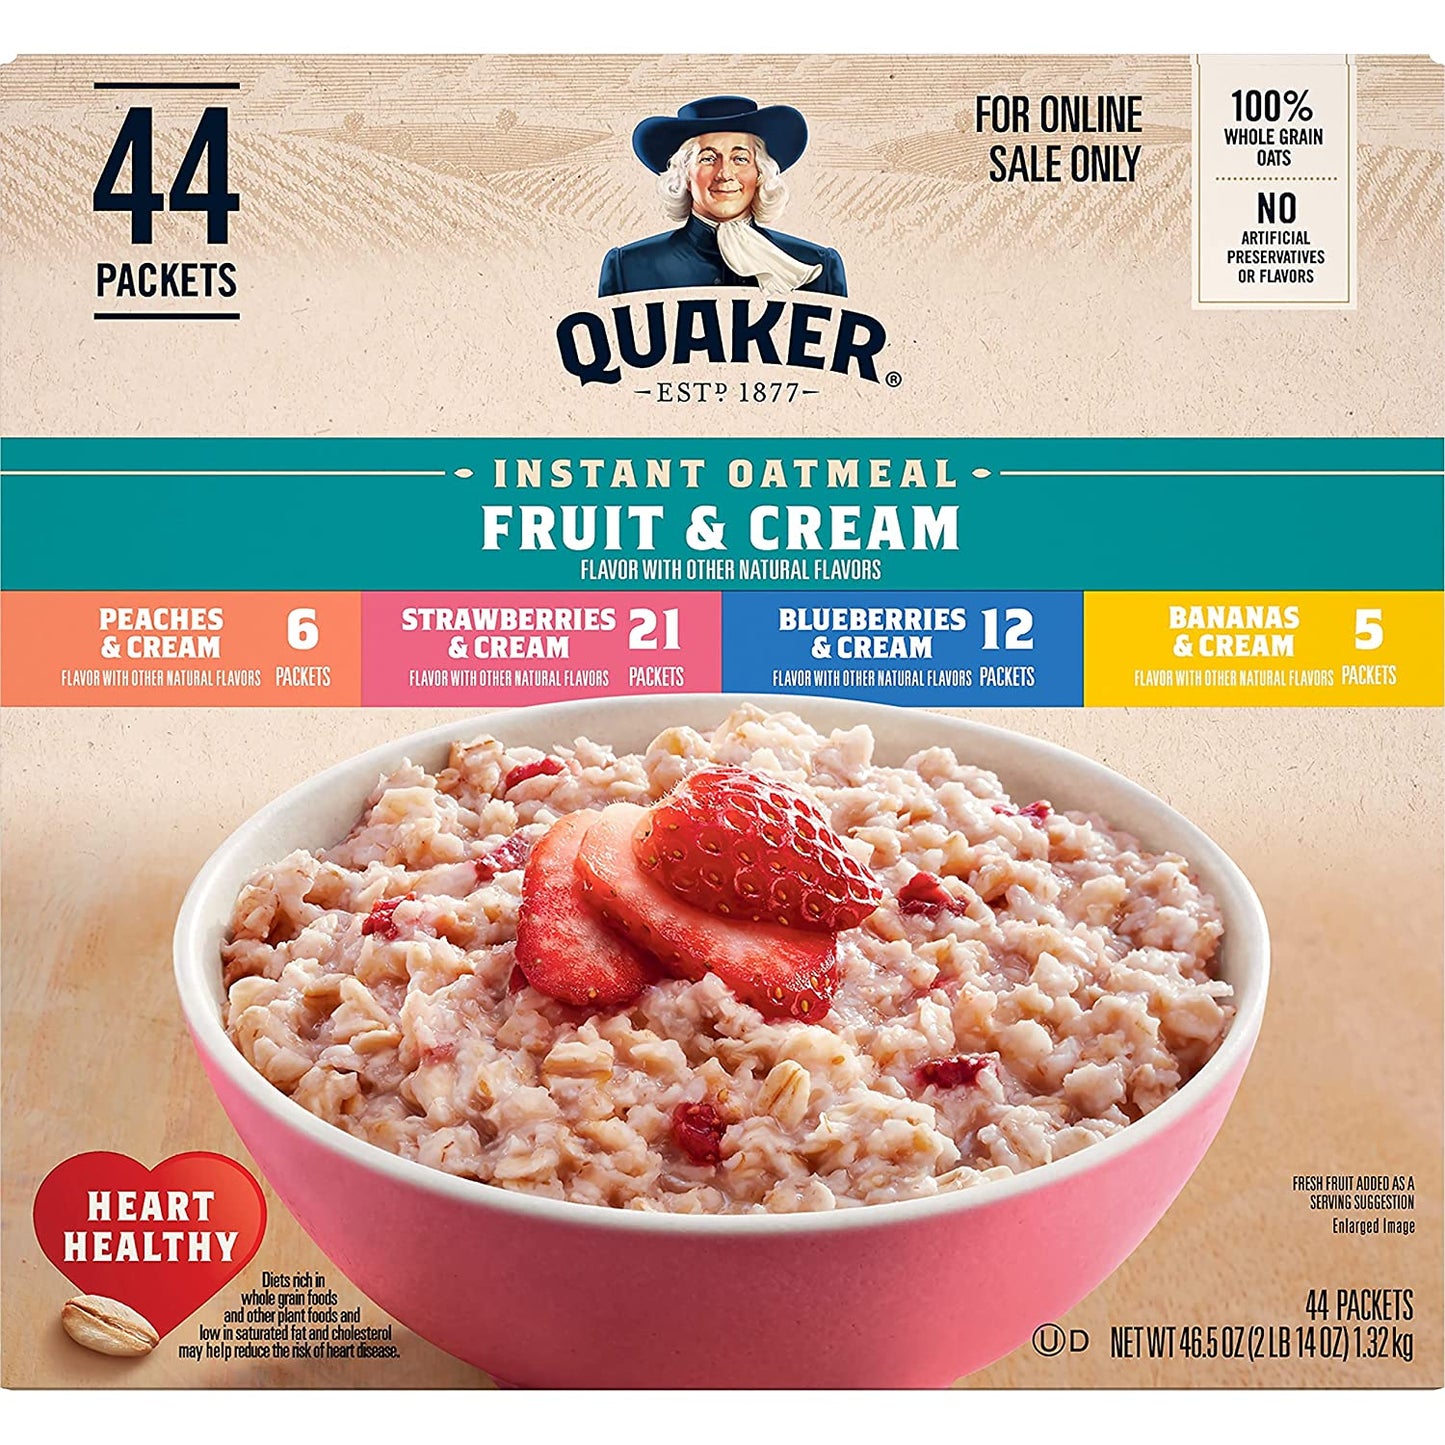 Quaker Instant Oatmeal Fruit & Cream Variety Pack, Multiple Colors, 44 Count